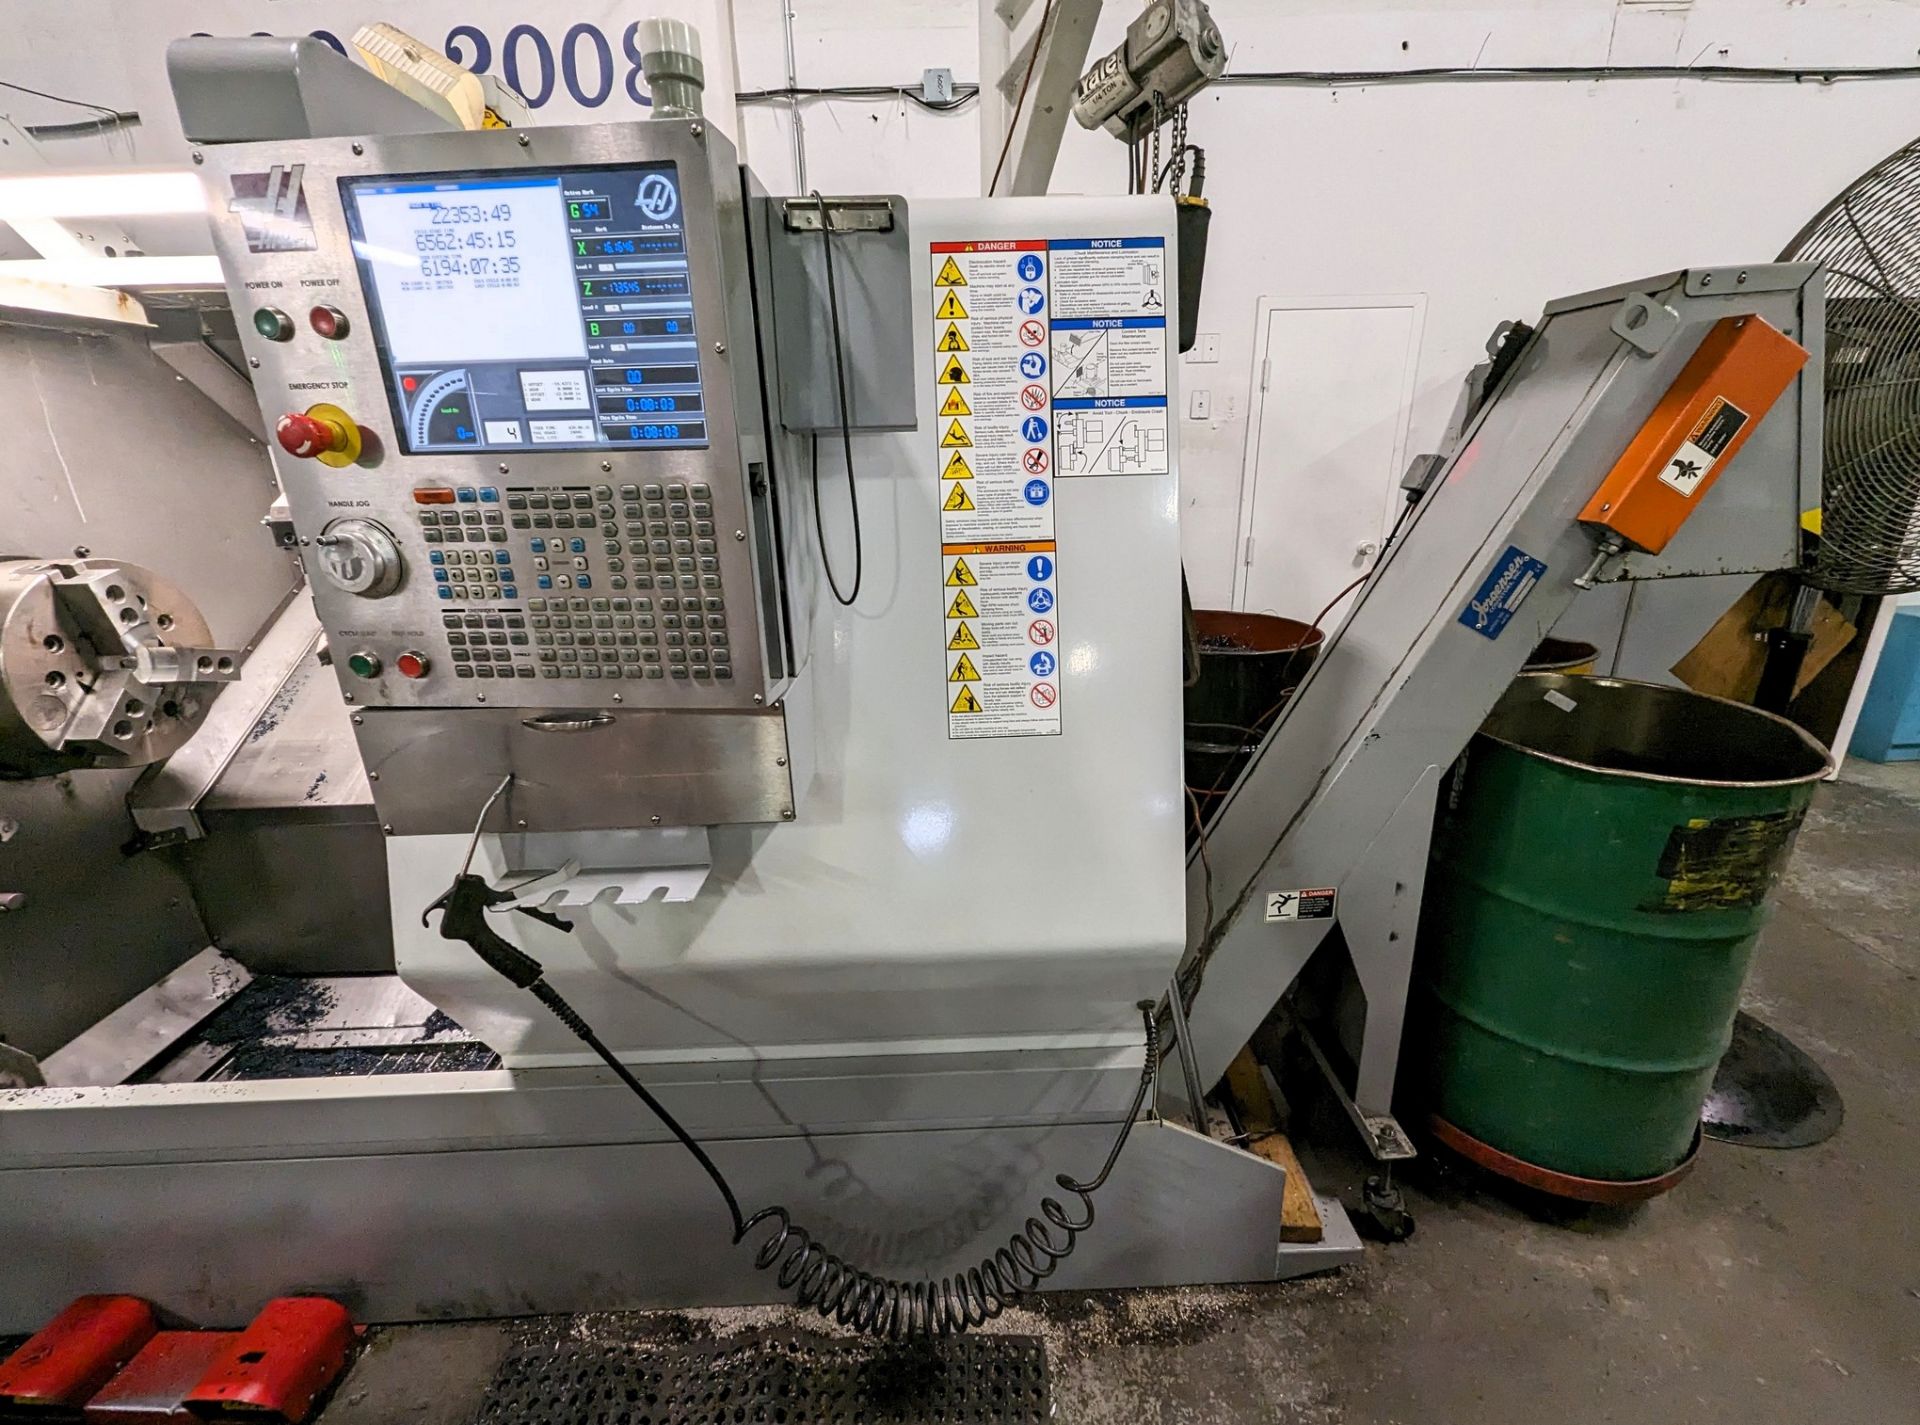 2008 HAAS SL-30TB CNC TURNING CENTER, CNC CONTROL, 15” CHUCK, BIG BORE, TAILSTOCK, TOOL SETTER, CHIP - Image 6 of 14